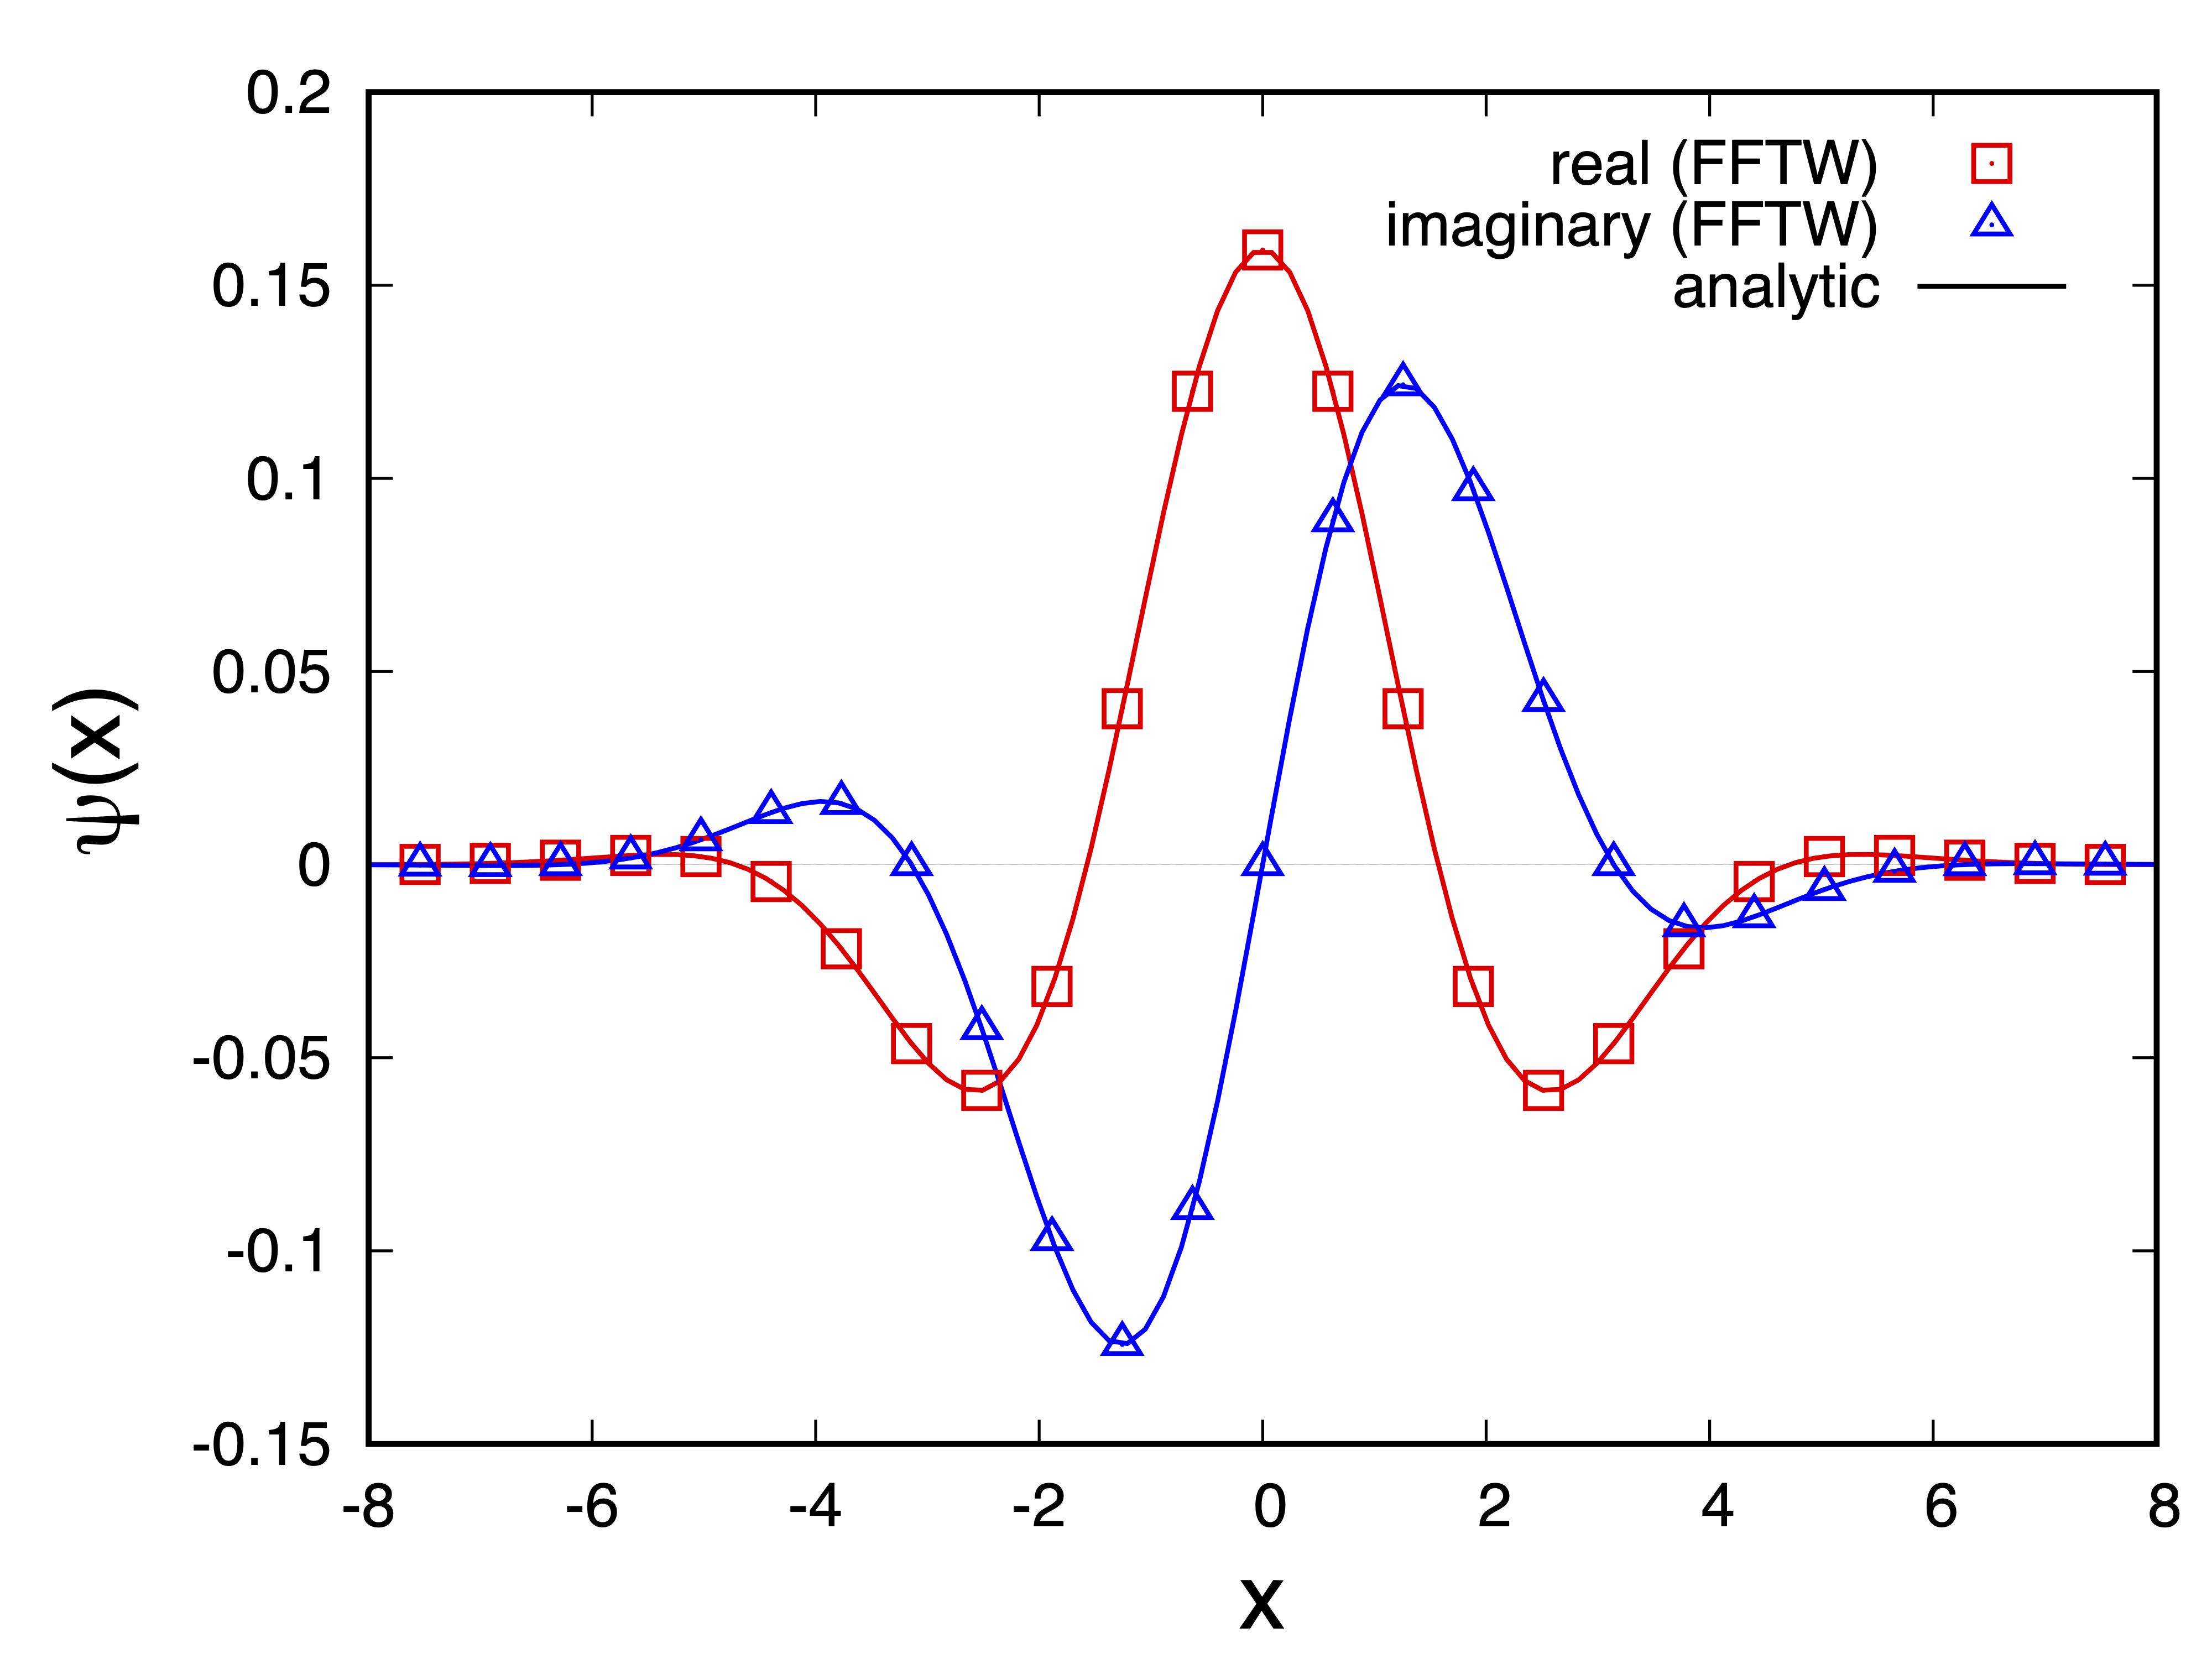 plot for Fourier-transformed Gaussian functions from FFTW library and analytic calculation